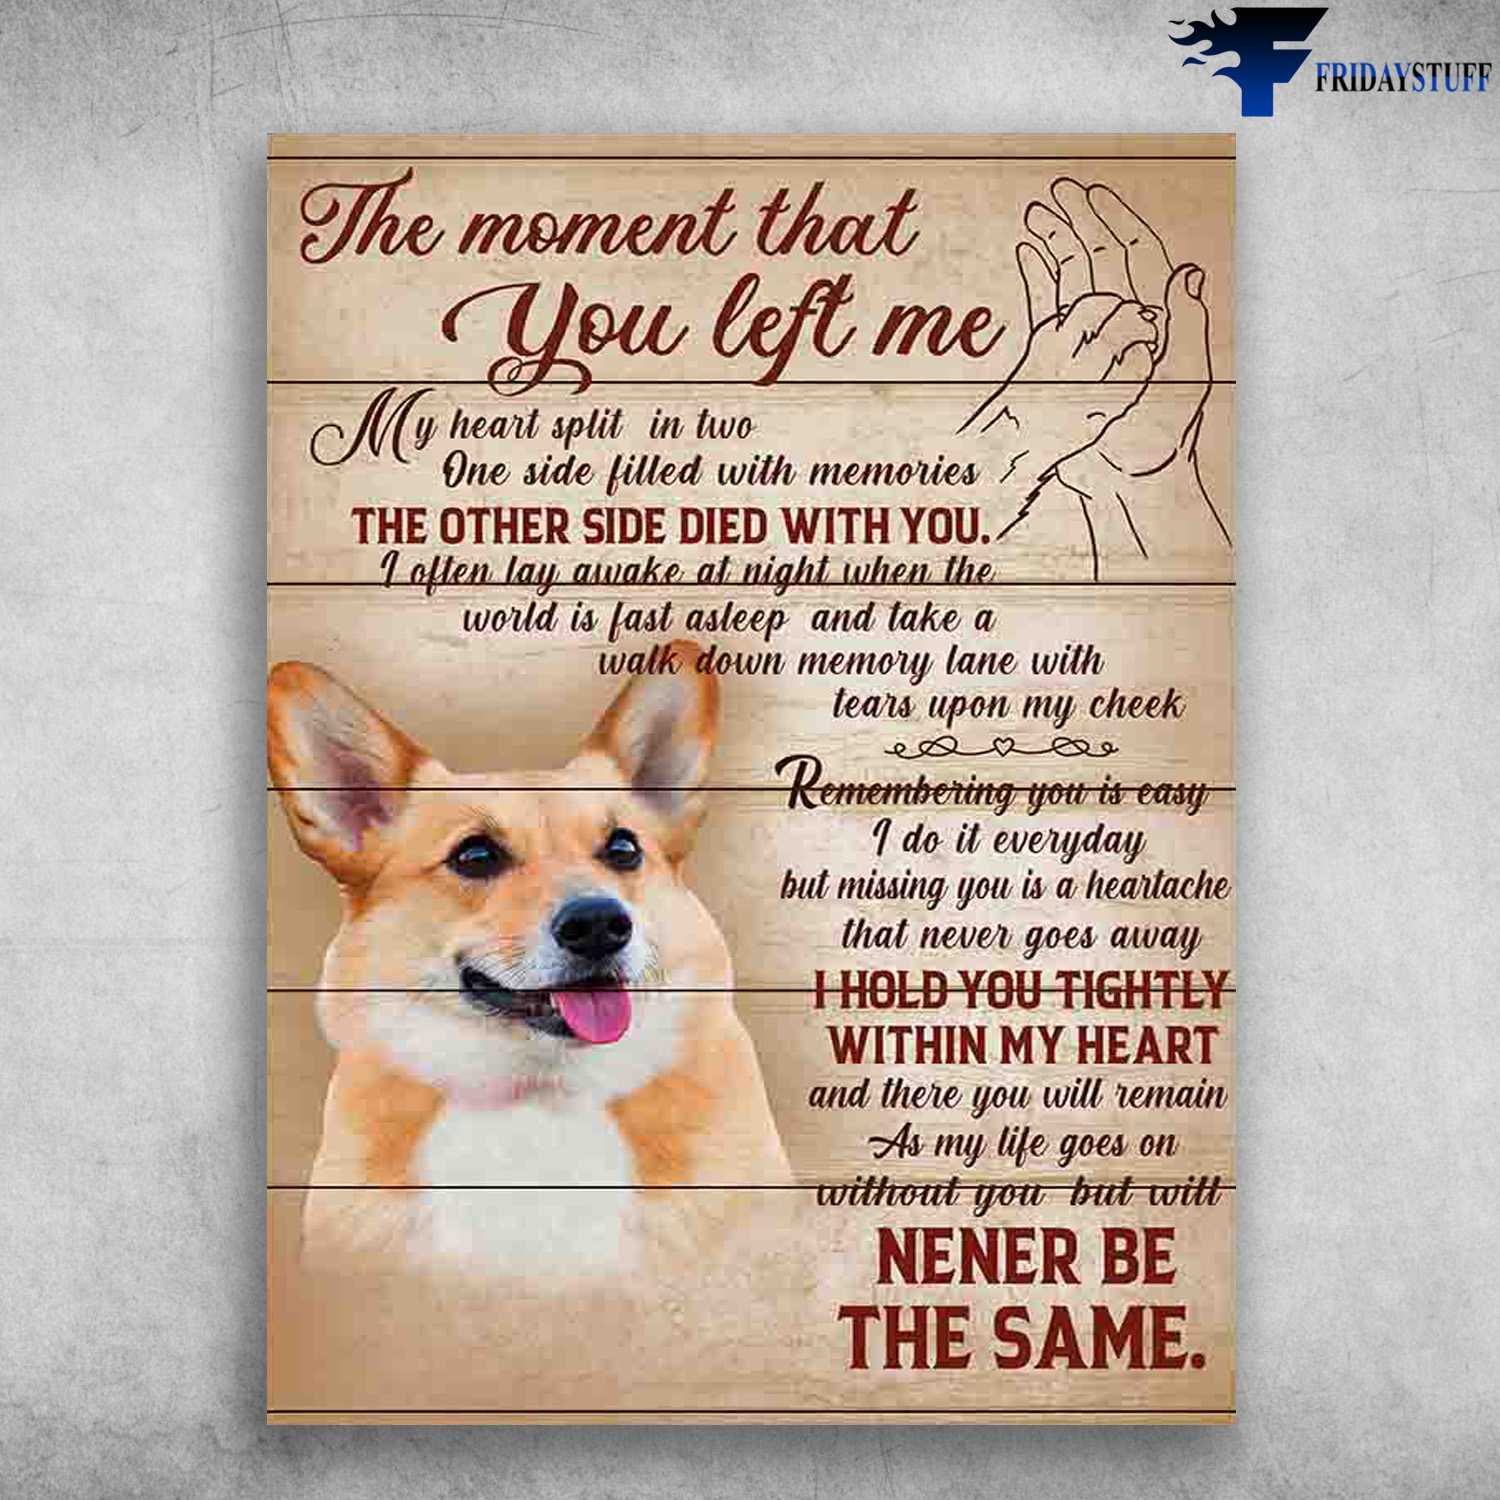 Corgi Dog, Dog Lover - The Moment That You Left Me, My Heart Split In Two, One Side Filled With Memories, The Other Side Died With You